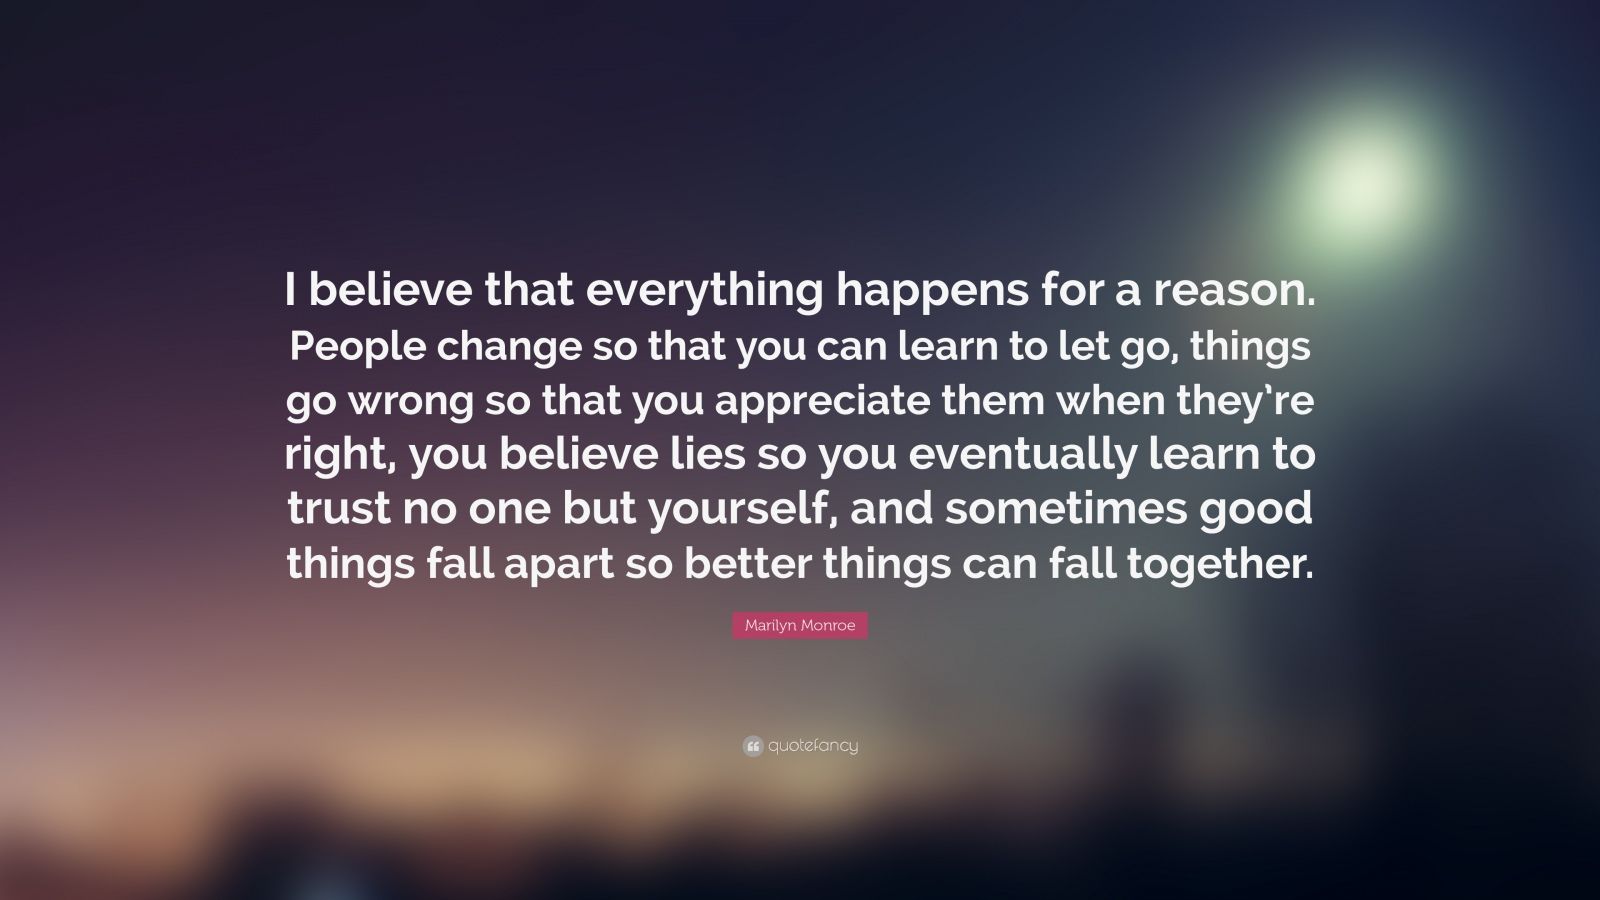 33001 Marilyn Monroe Quote I believe that everything happens for a